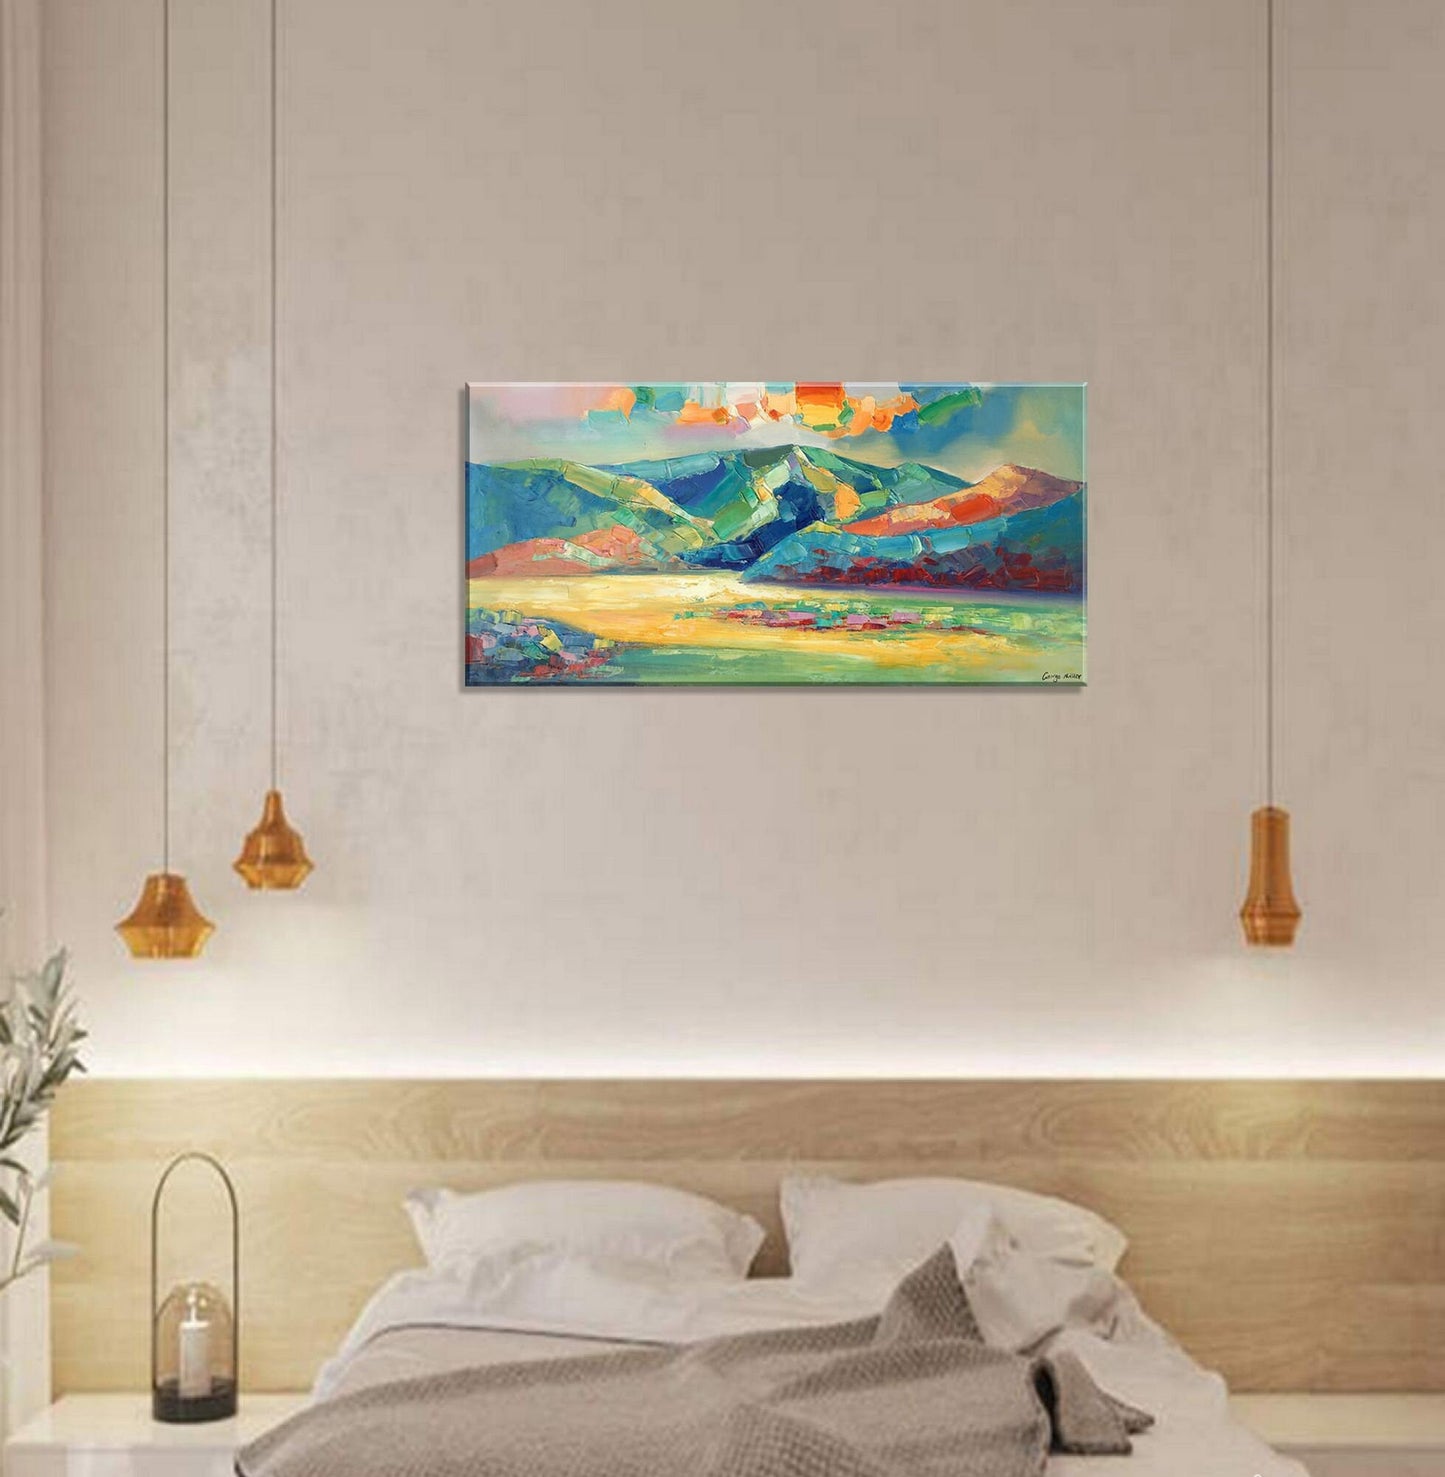 Abstract Landscape Oil Painting, Artwork, Paintings On Canvas, Abstract Landscape, Large Painting, Impressionist Art, Texture Painting